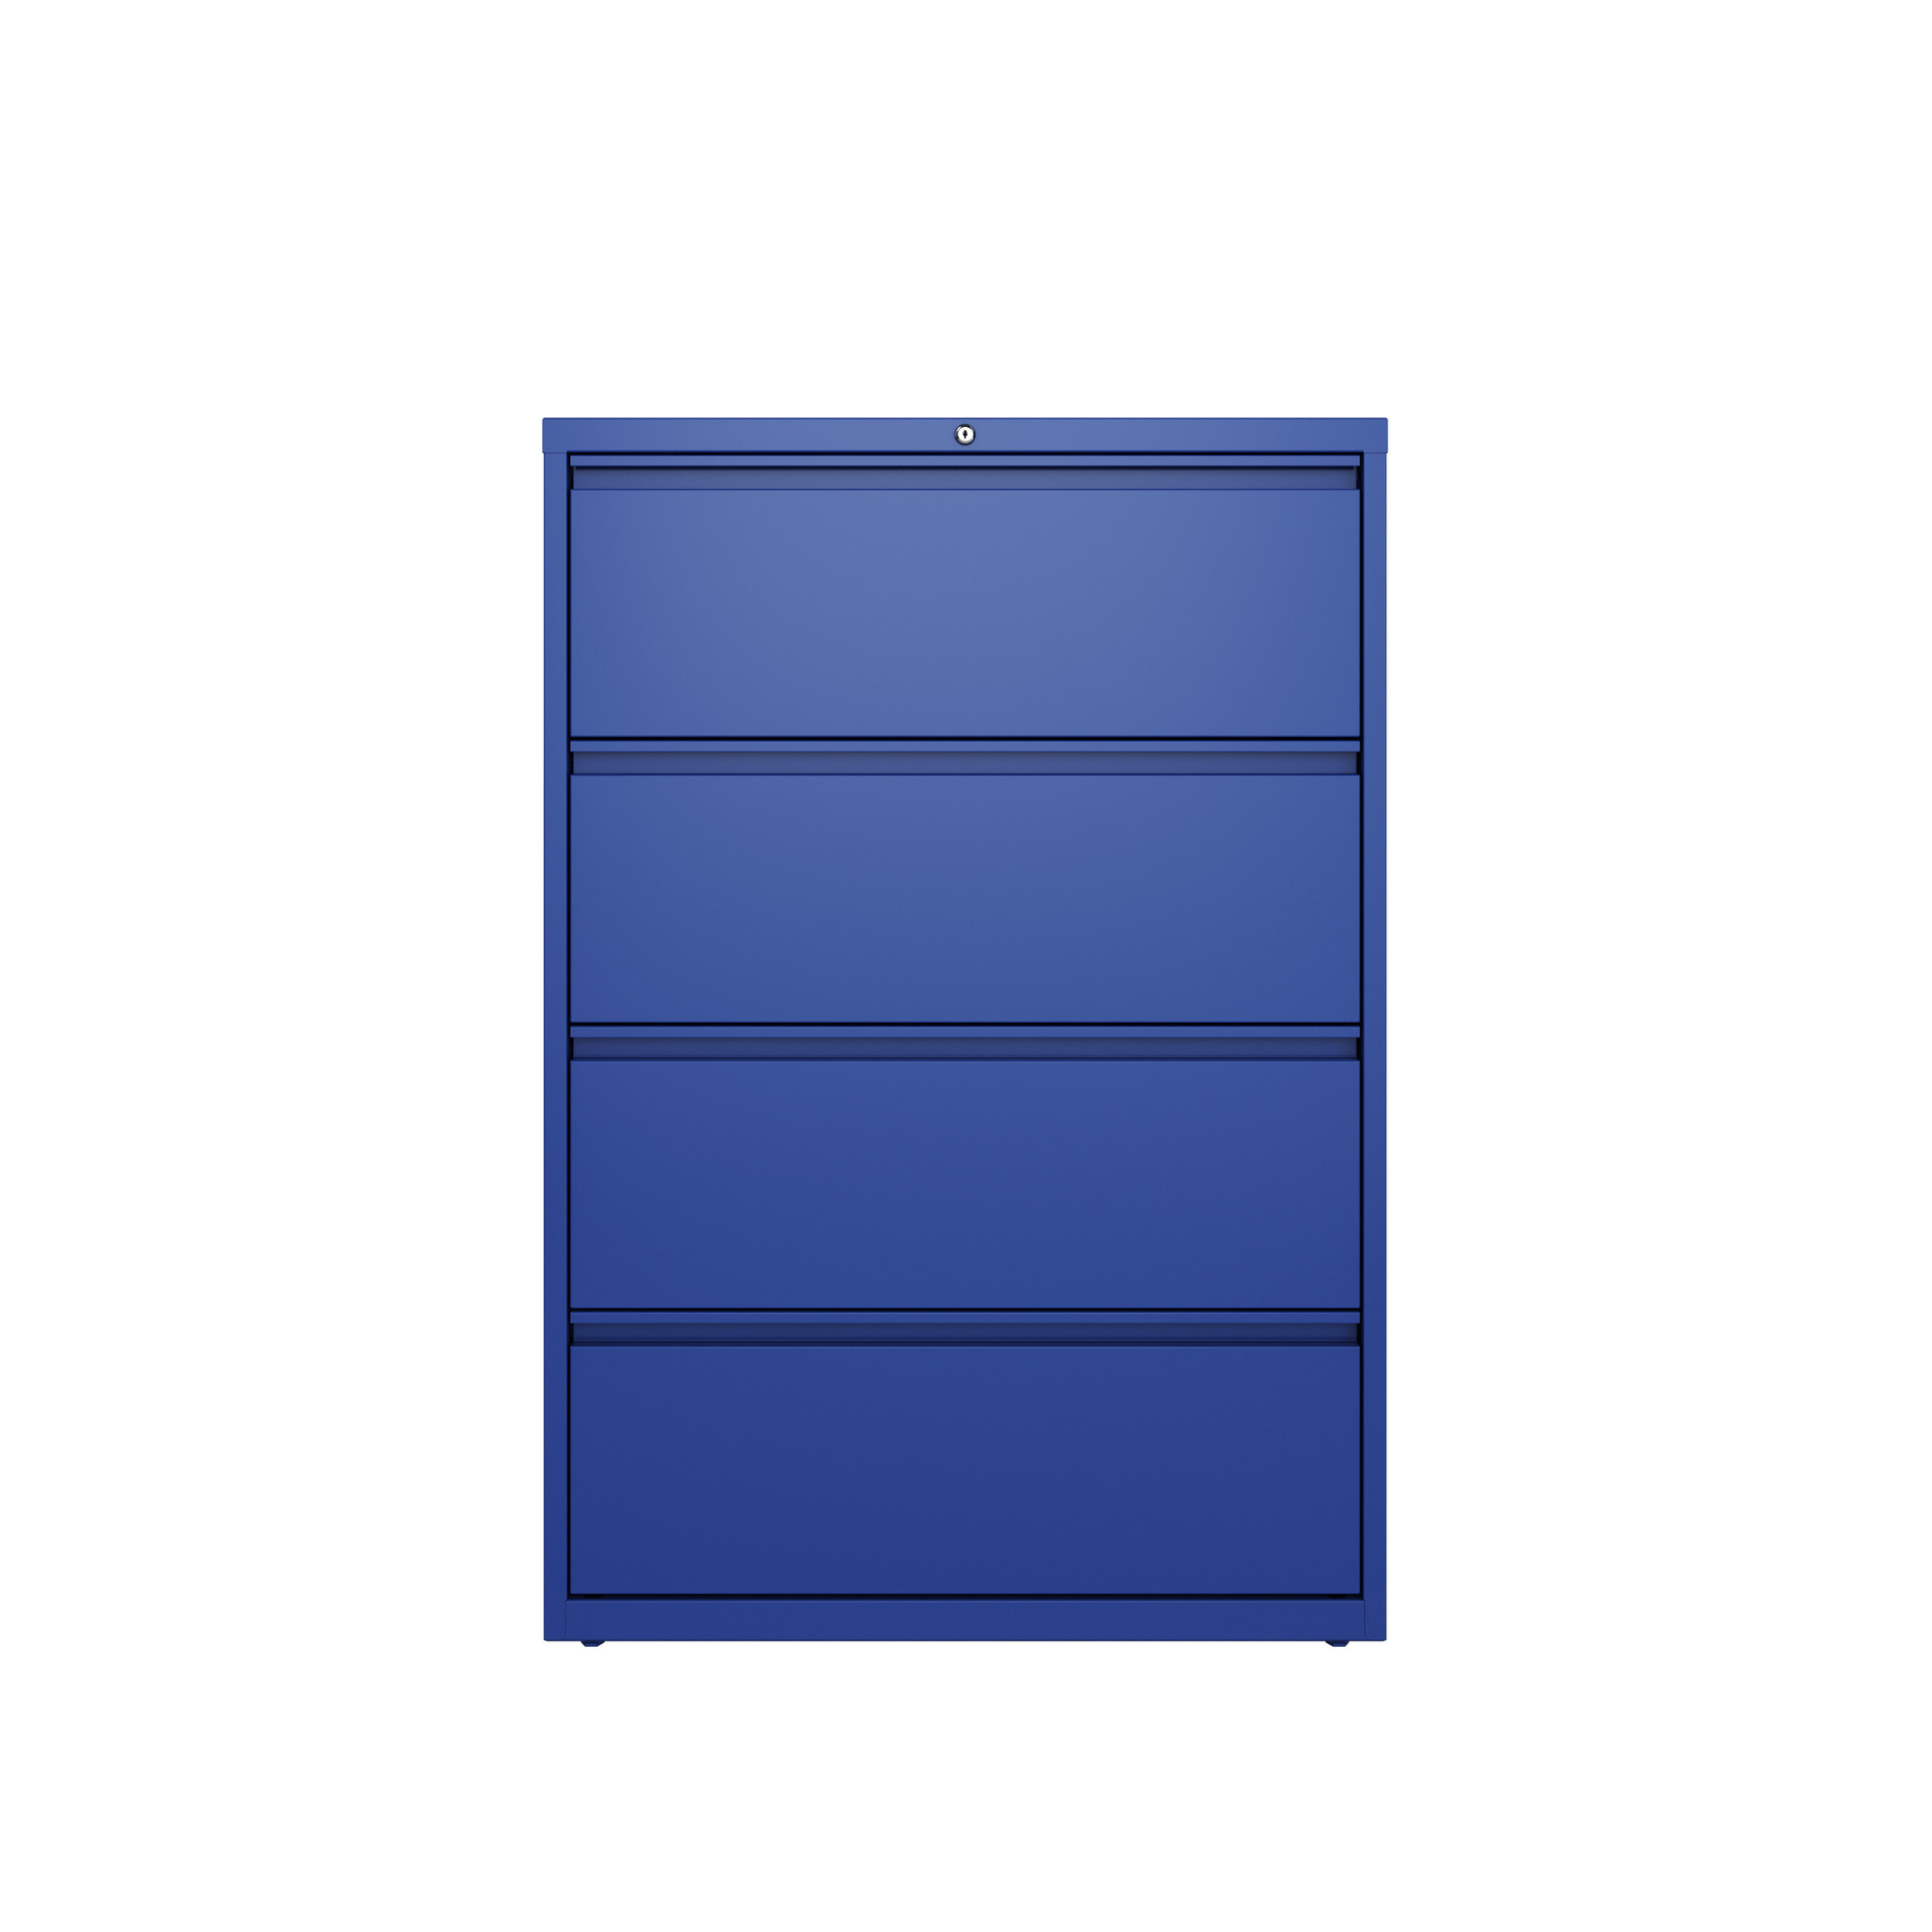 Hirsh Industries, 4 Drawer Lateral File Cabinet, Width 36 in, Depth 18.625 in, Height 52.5 in, Model 24257